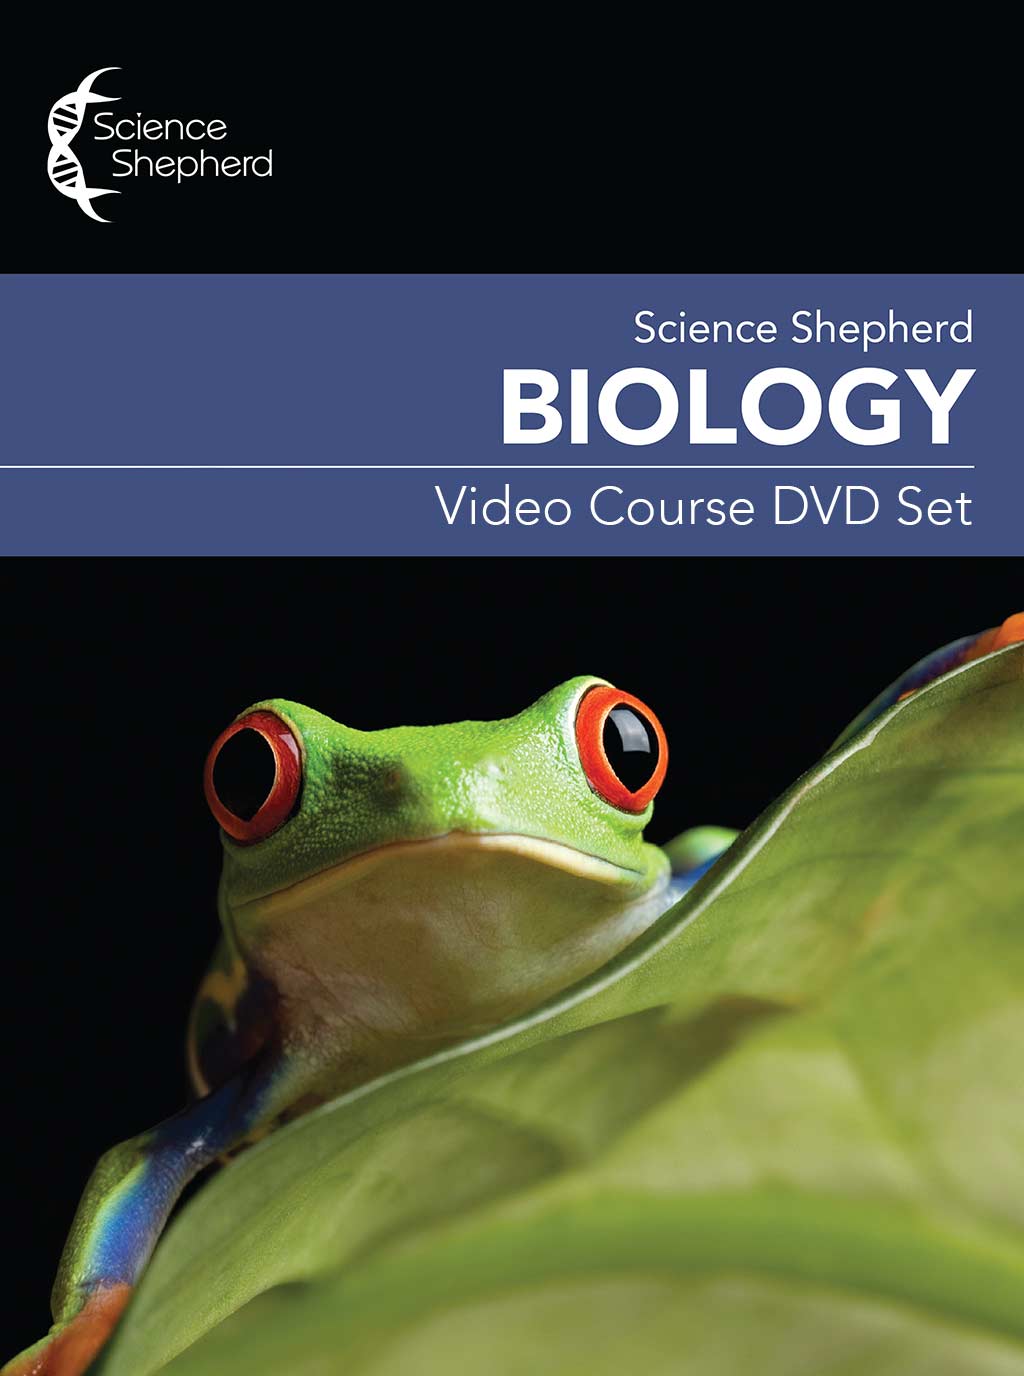 Biology homeschool science DVD curriculum cover of a frog on a green leaf